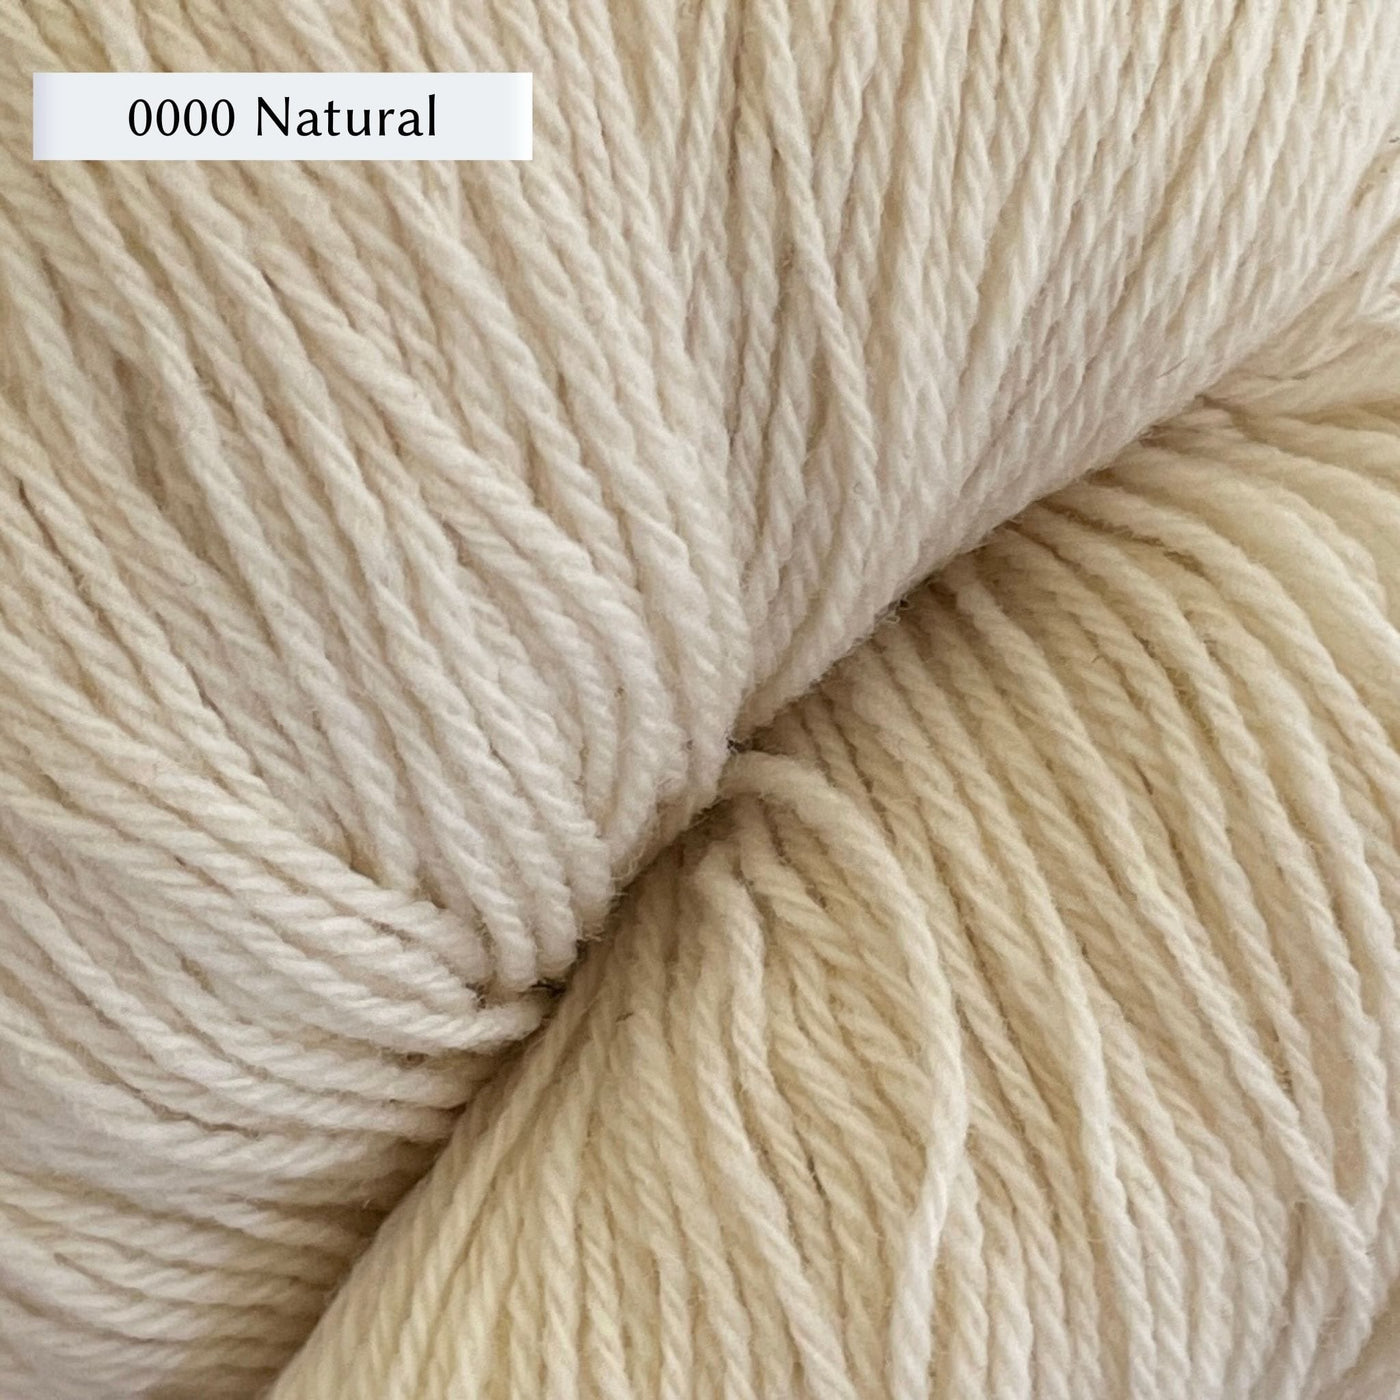 WoolDreamers Dehesa de Barrera, a fingering weight yarn, in color 0000 Natural, a natural cream 